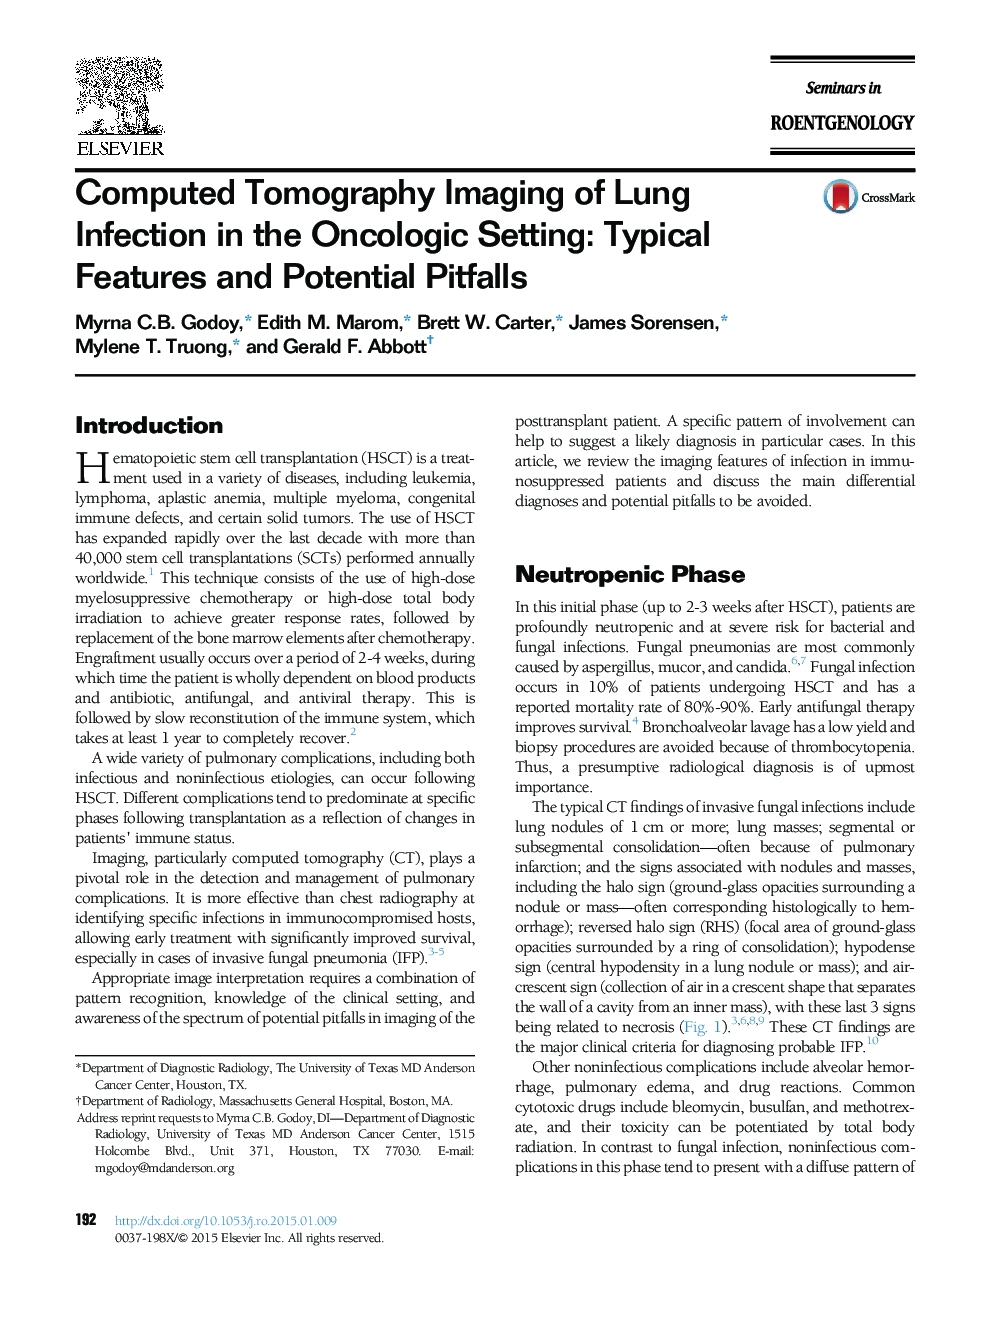 Computed Tomography Imaging of Lung Infection in the Oncologic Setting: Typical Features and Potential Pitfalls